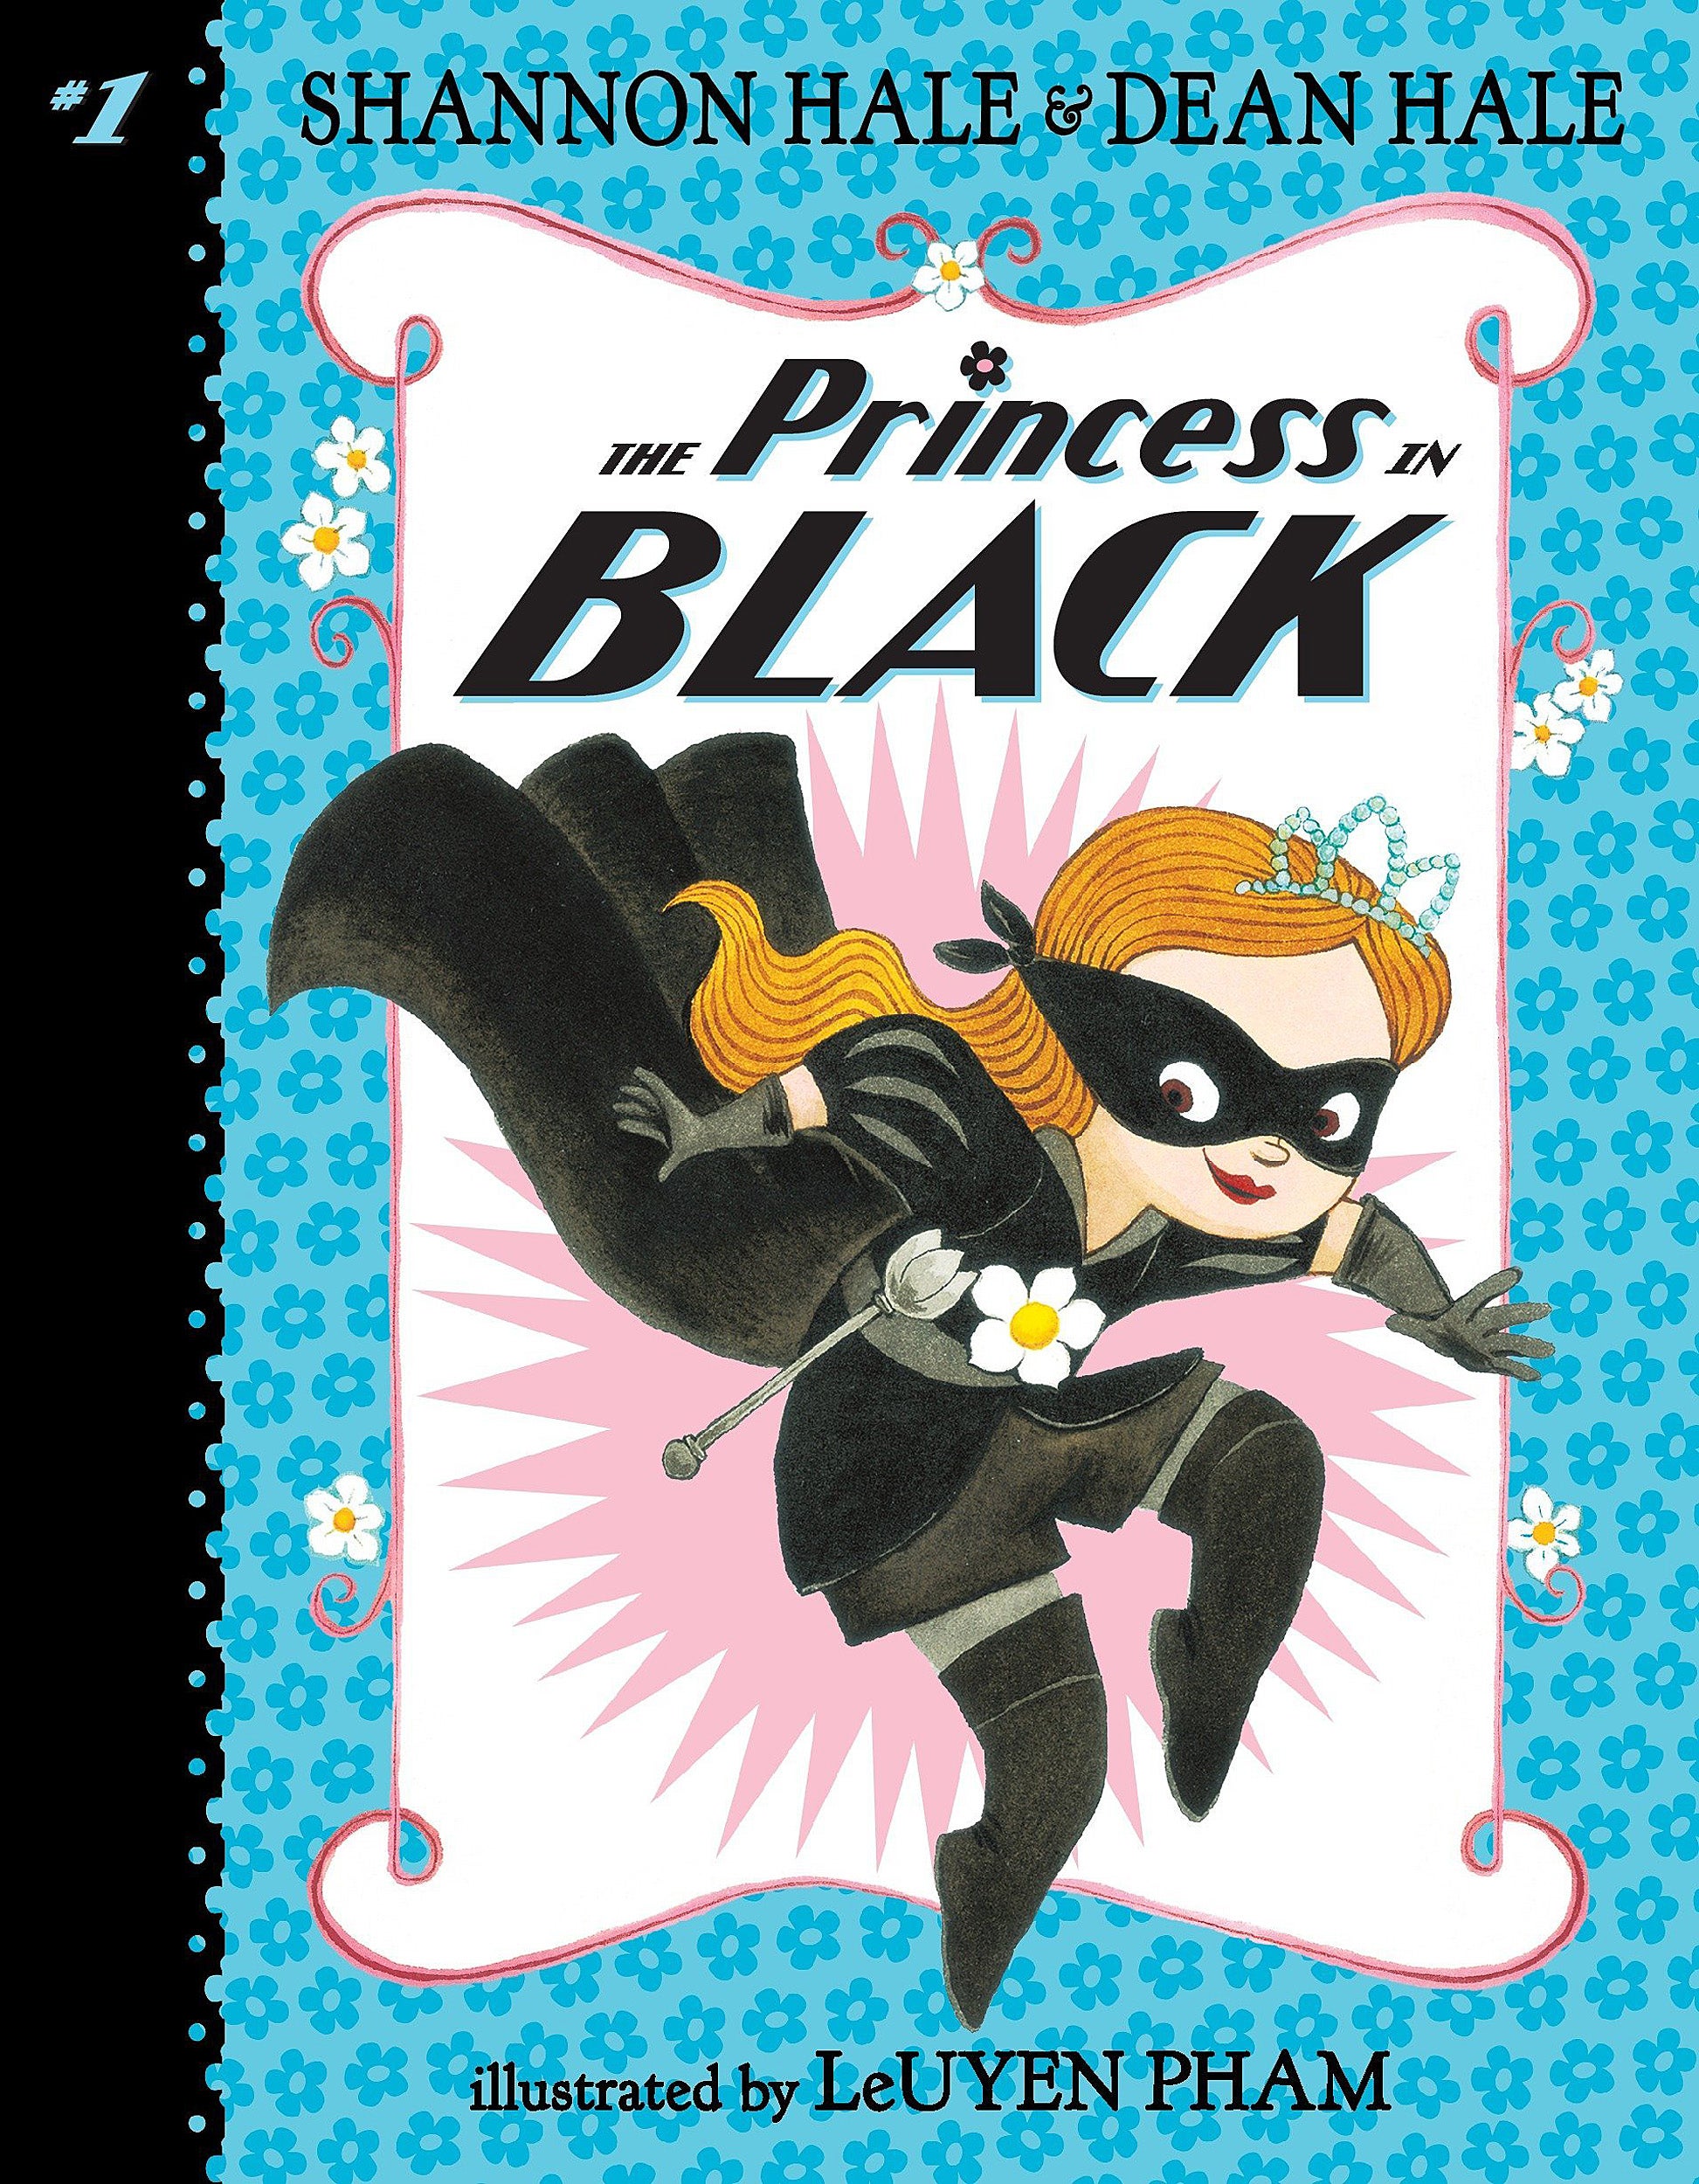 Cover: “Princess in Black” series by Shannon and Dean Hale.